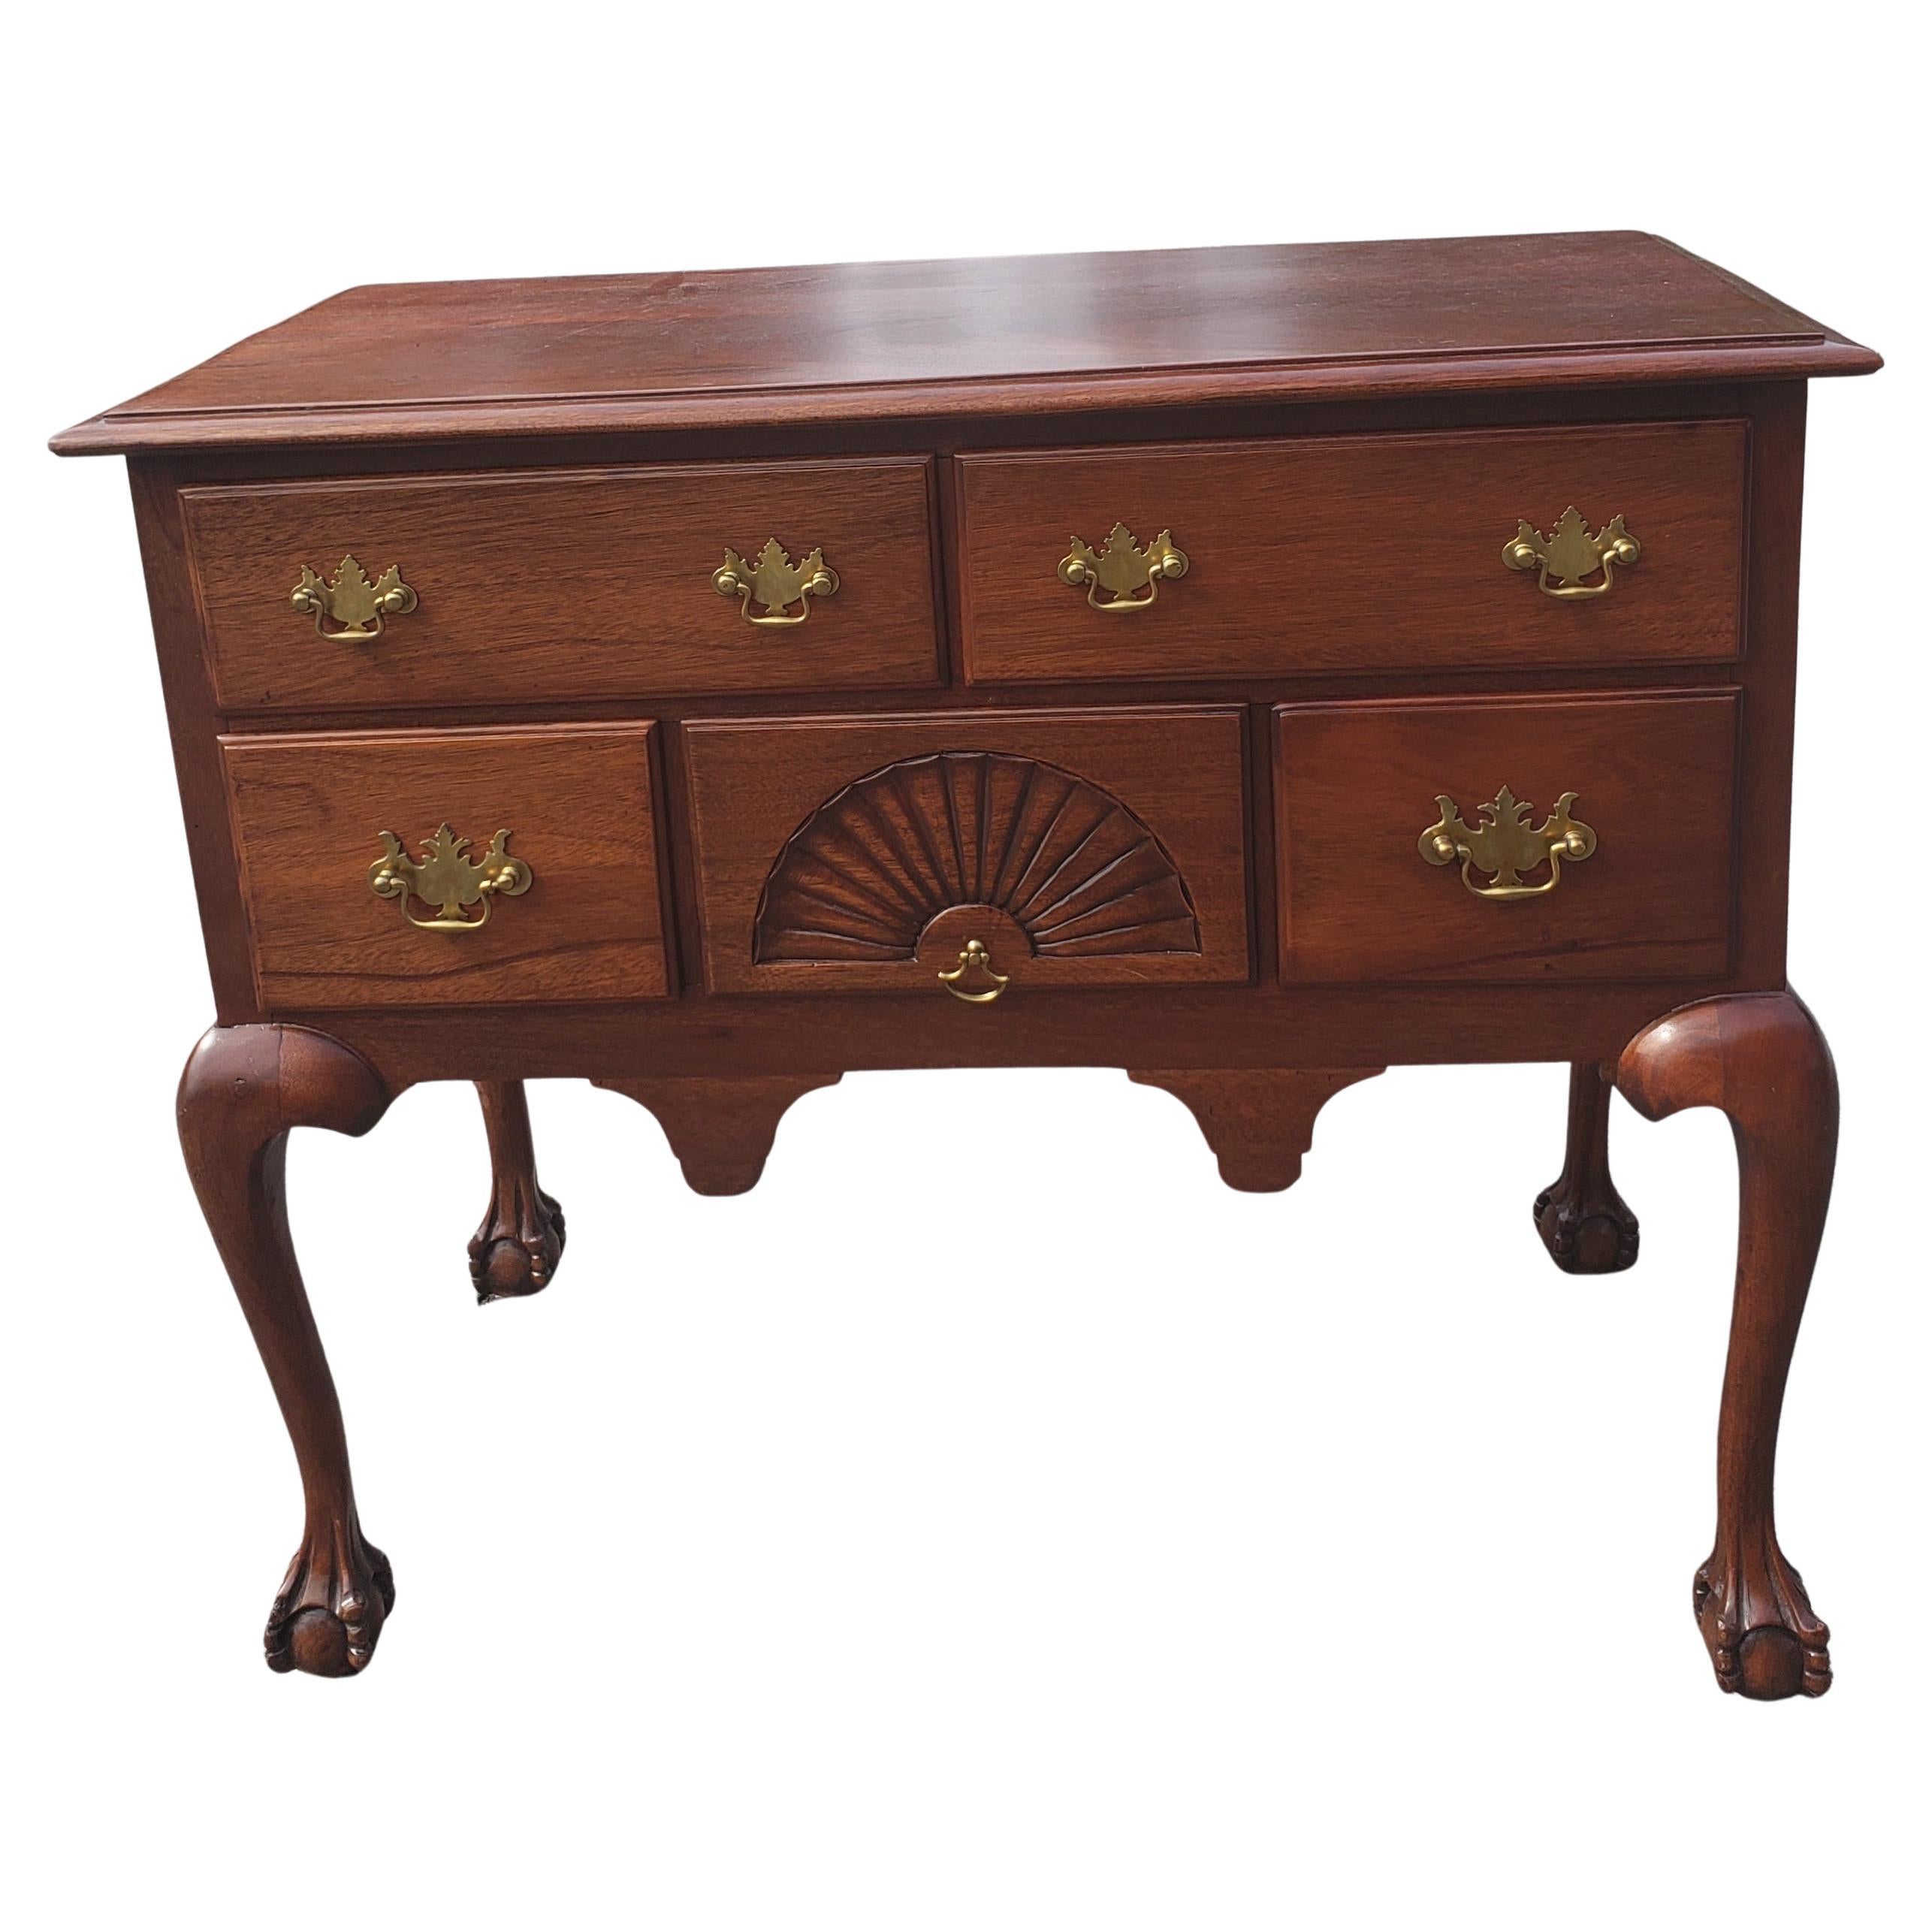 Late 19th Century Chippendale Mahogany Lowboy with Ball and Claw Feet In Good Condition For Sale In Germantown, MD